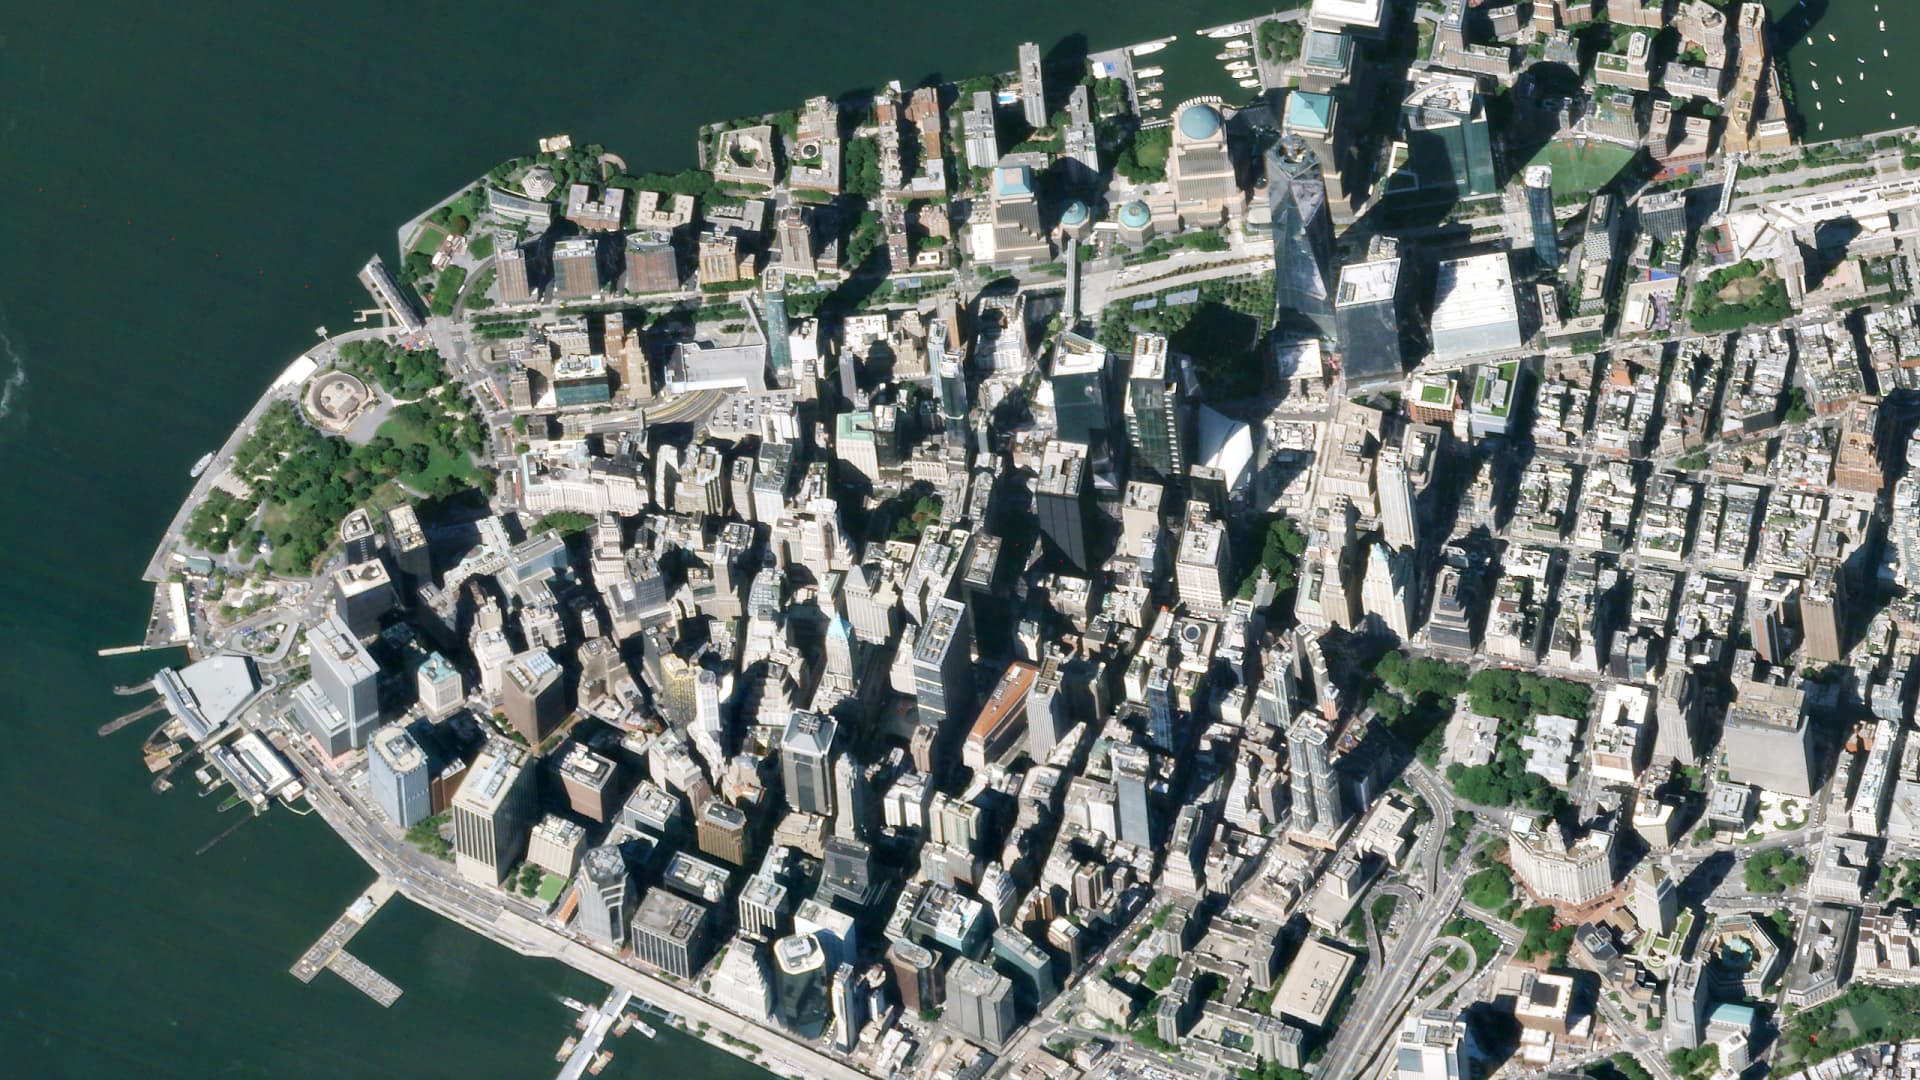 An image from one of the company's satellites shows Lower Manhattan in New York City.